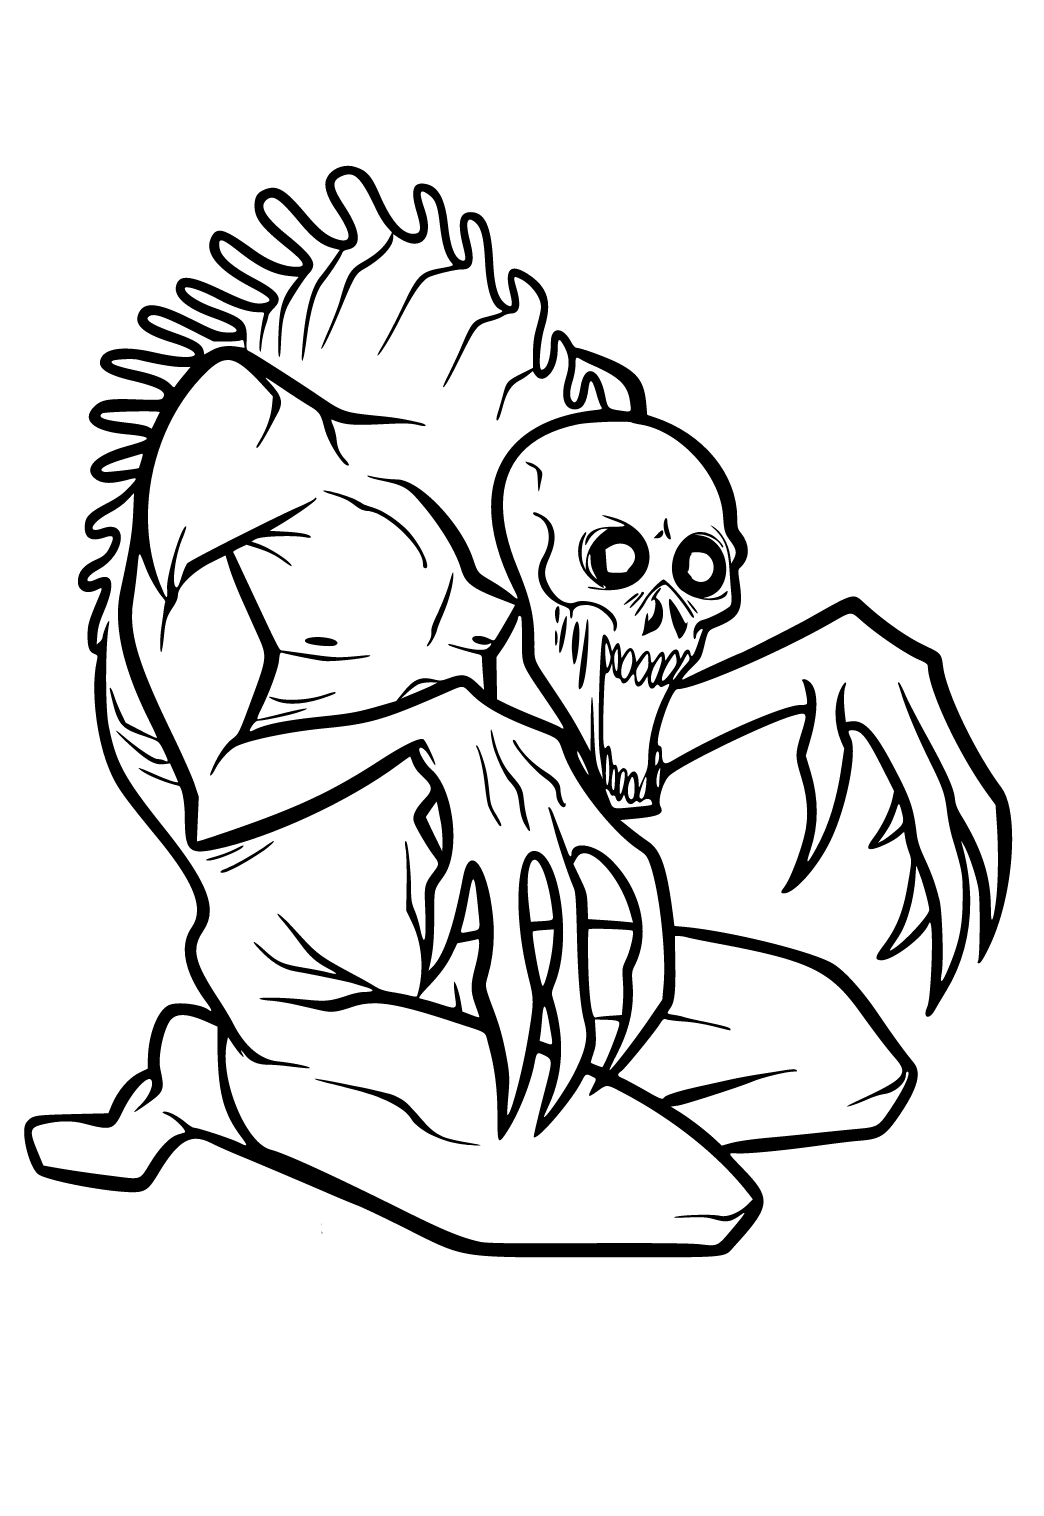 Free printable scary monster coloring page for adults and kids